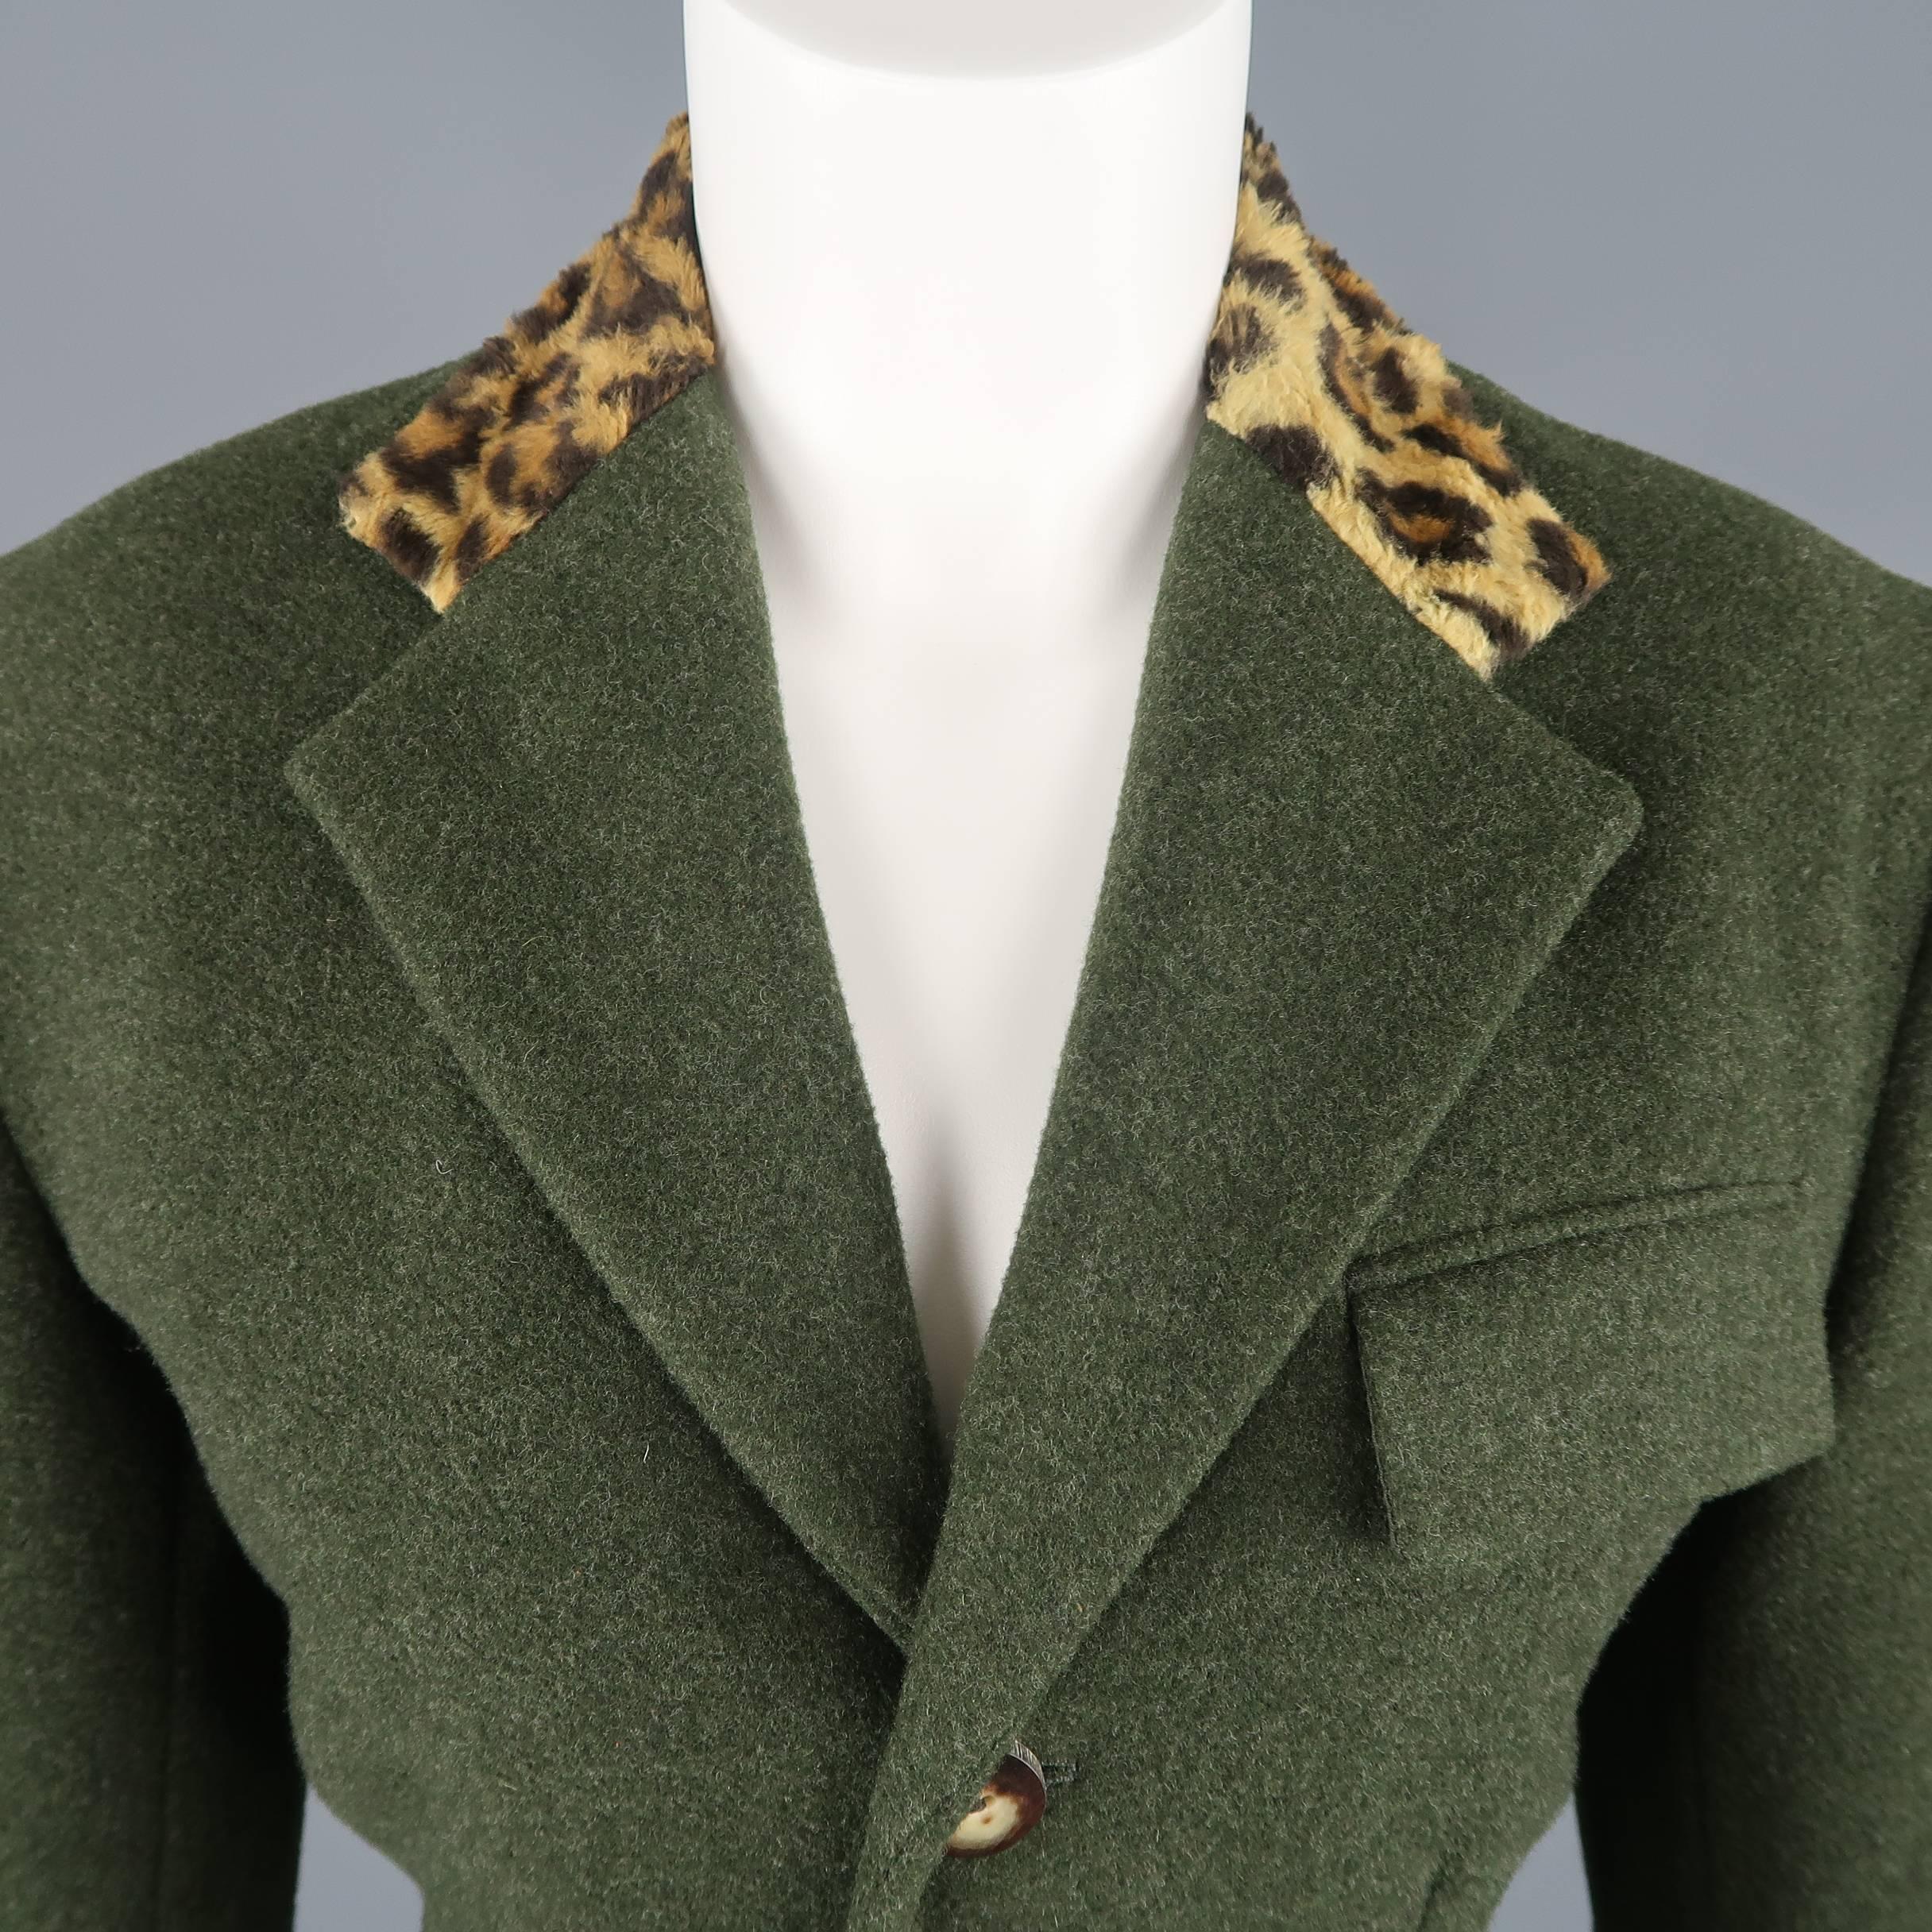 RALPH LAUREN COLLECTION jacket comes in forest green cashmere wool blend felt with a notch lapel, three wooden button closure, slanted flap pockets, and leopard print fuzzy collar and cuffs. Matching skirt sold separately. Made in USA.
 
Good